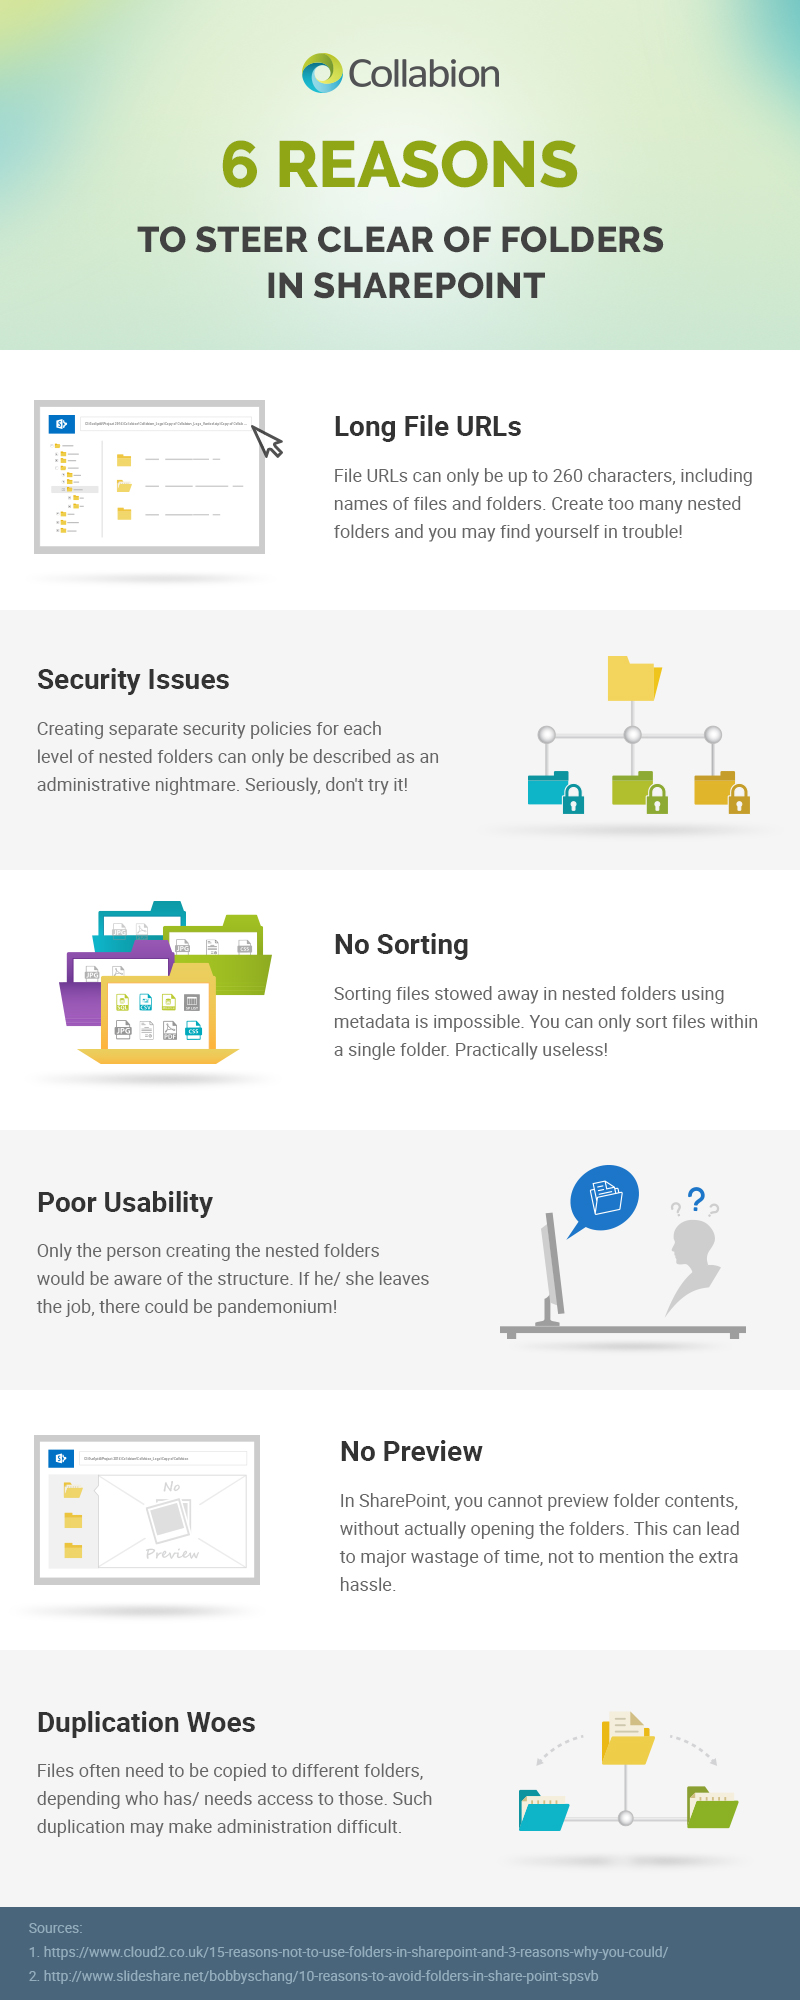 6 reasons to steer clear of folders in SharePoint infographic